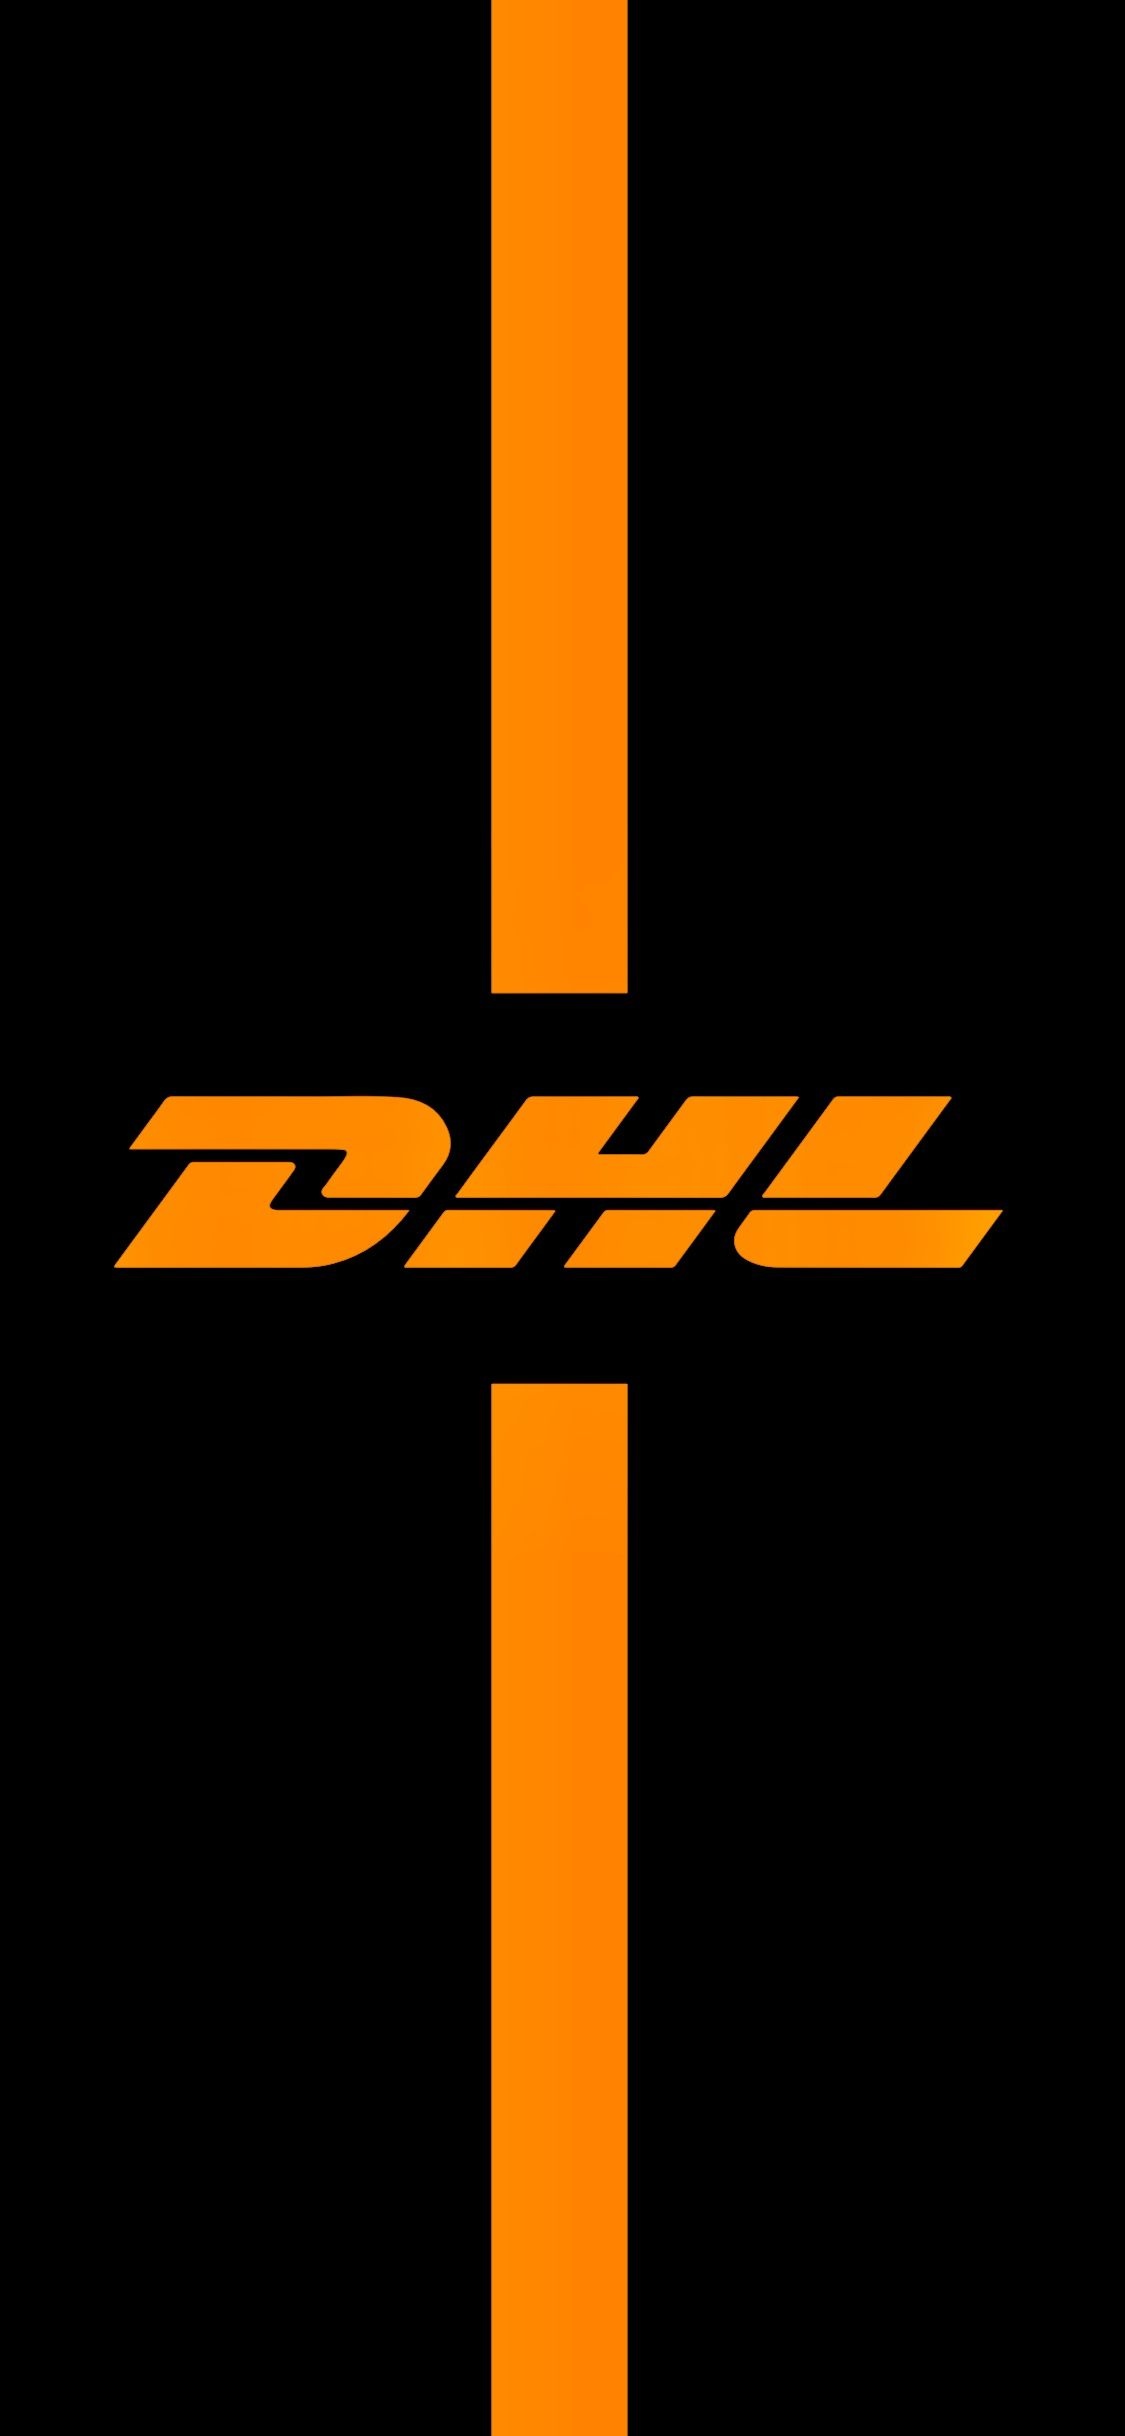 DHL: An alternative shipping carrier specializing in international shipping, Logo. 1130x2440 HD Background.